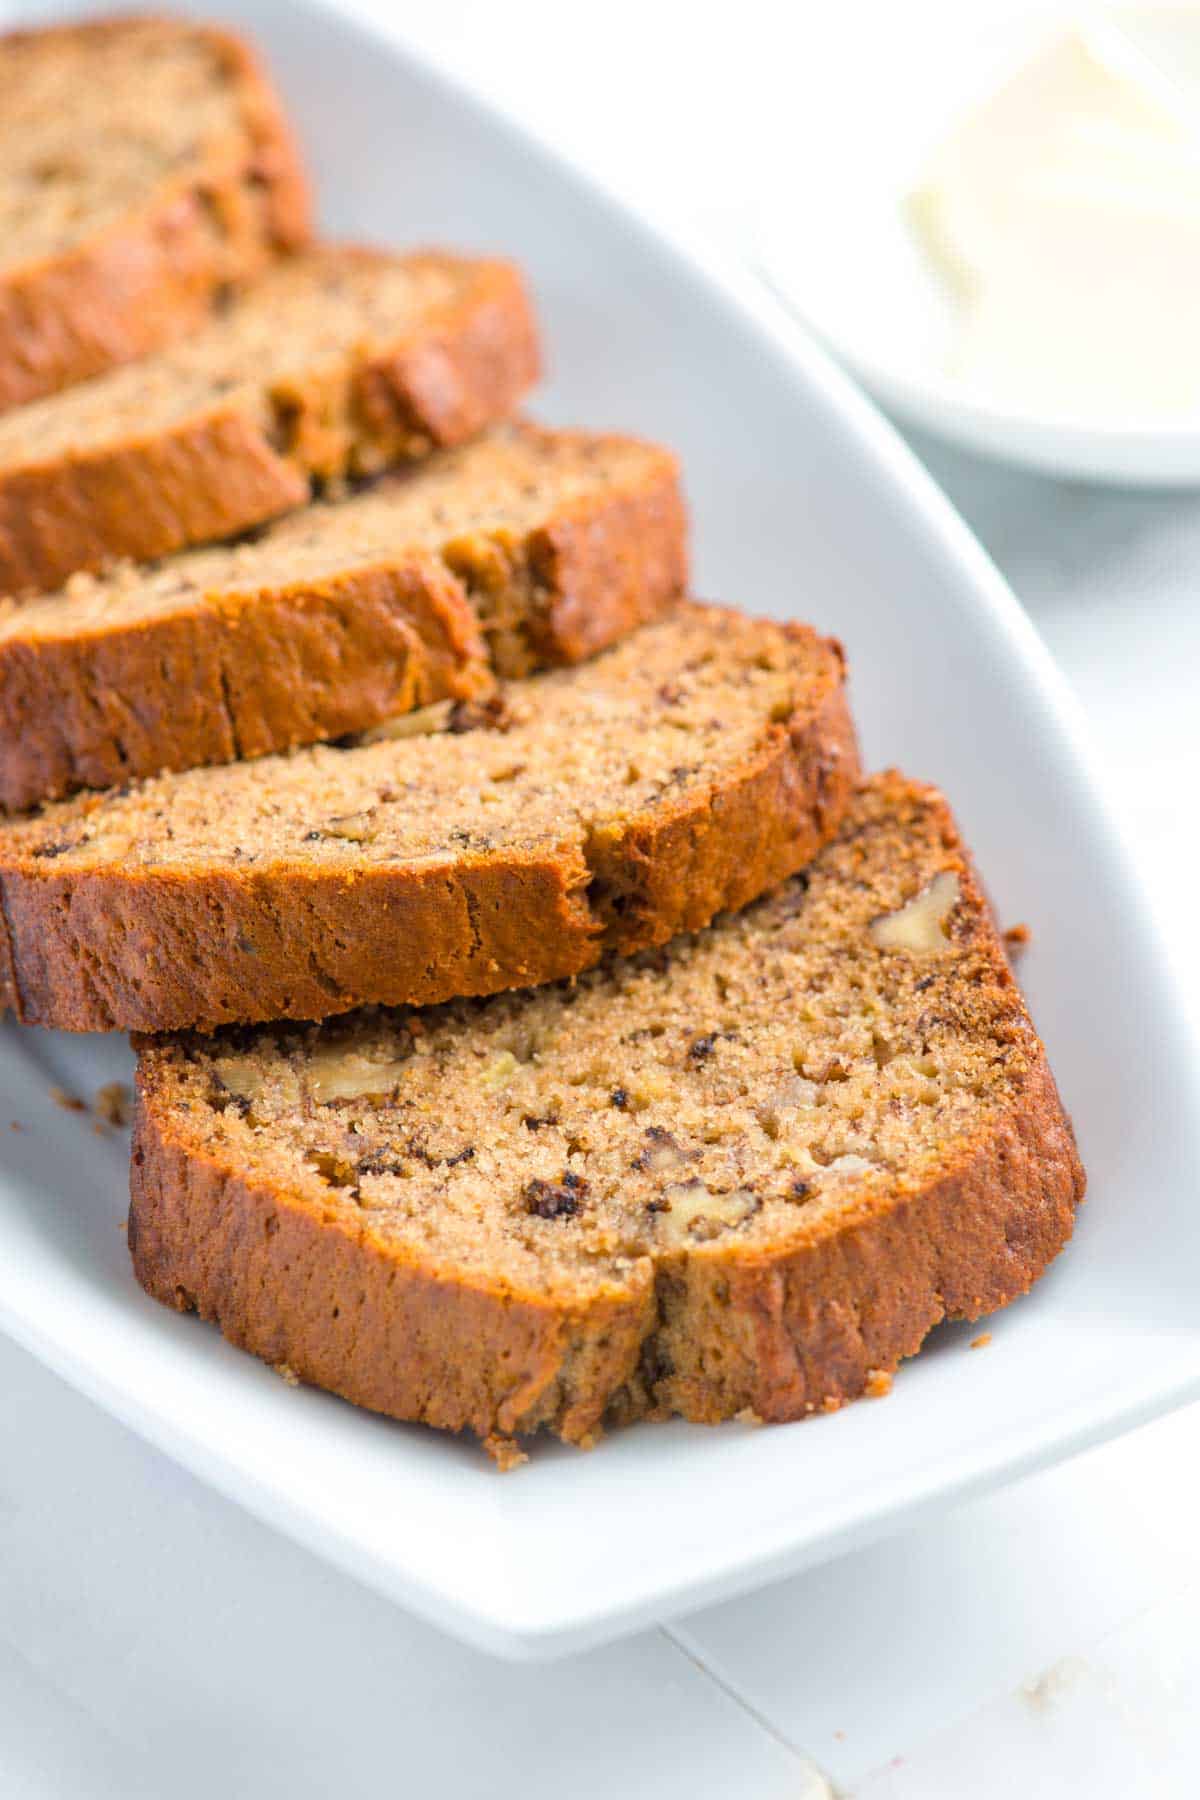 Slices of banana bread with walnuts and a moist tender crumb